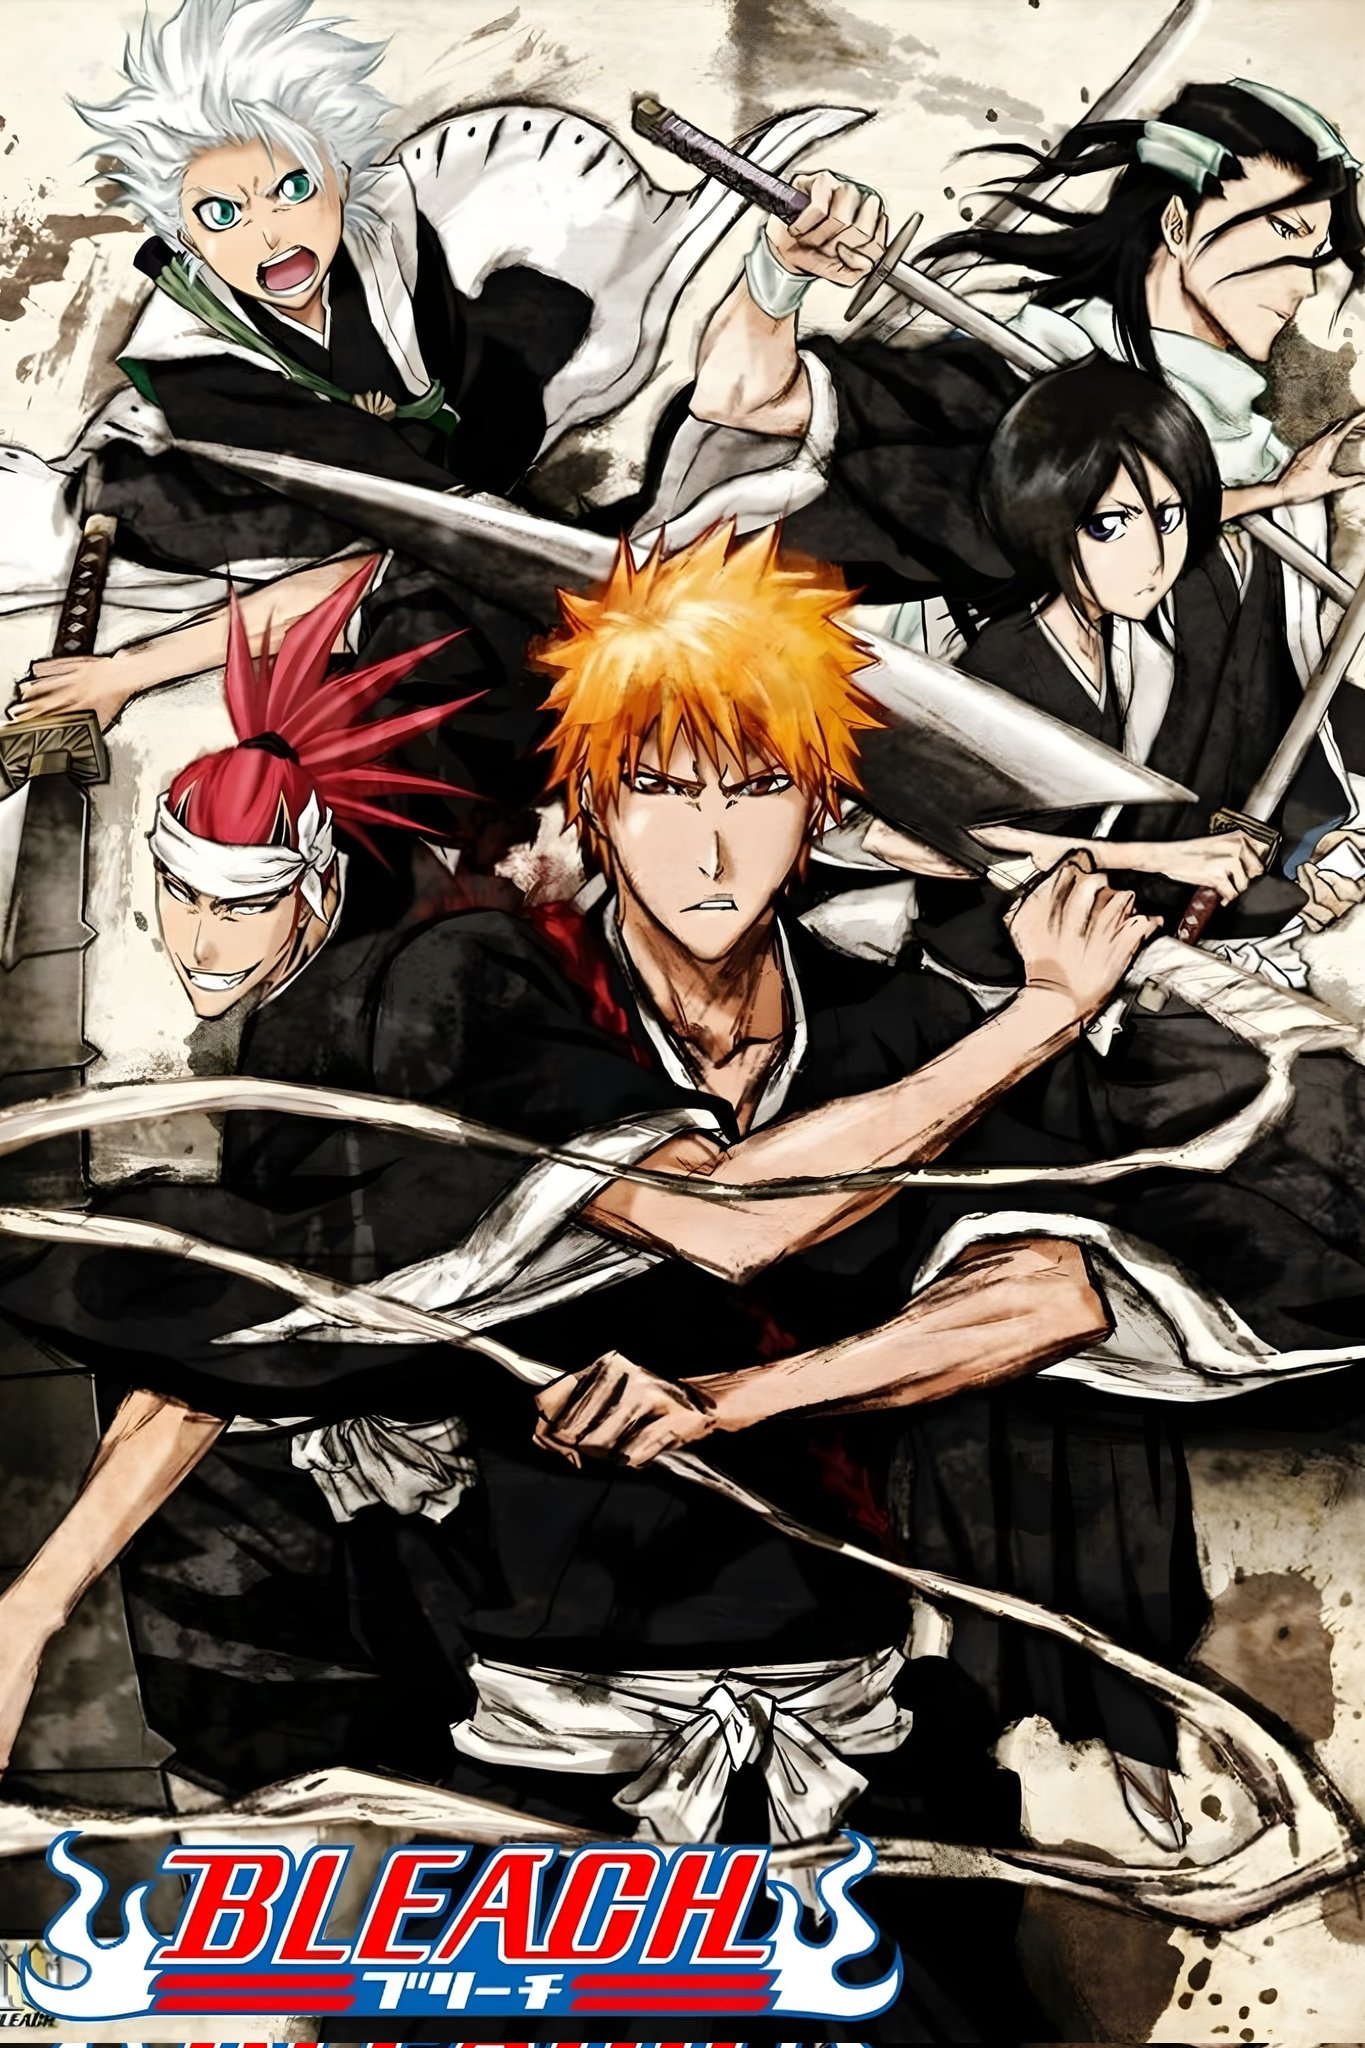 Weeb Central on X: Crunchyroll has added all the Episodes of the Original  BLEACH Anime in India region!! All 366 Eps of BLEACH are now streaming on  Crunchyroll India in JP with